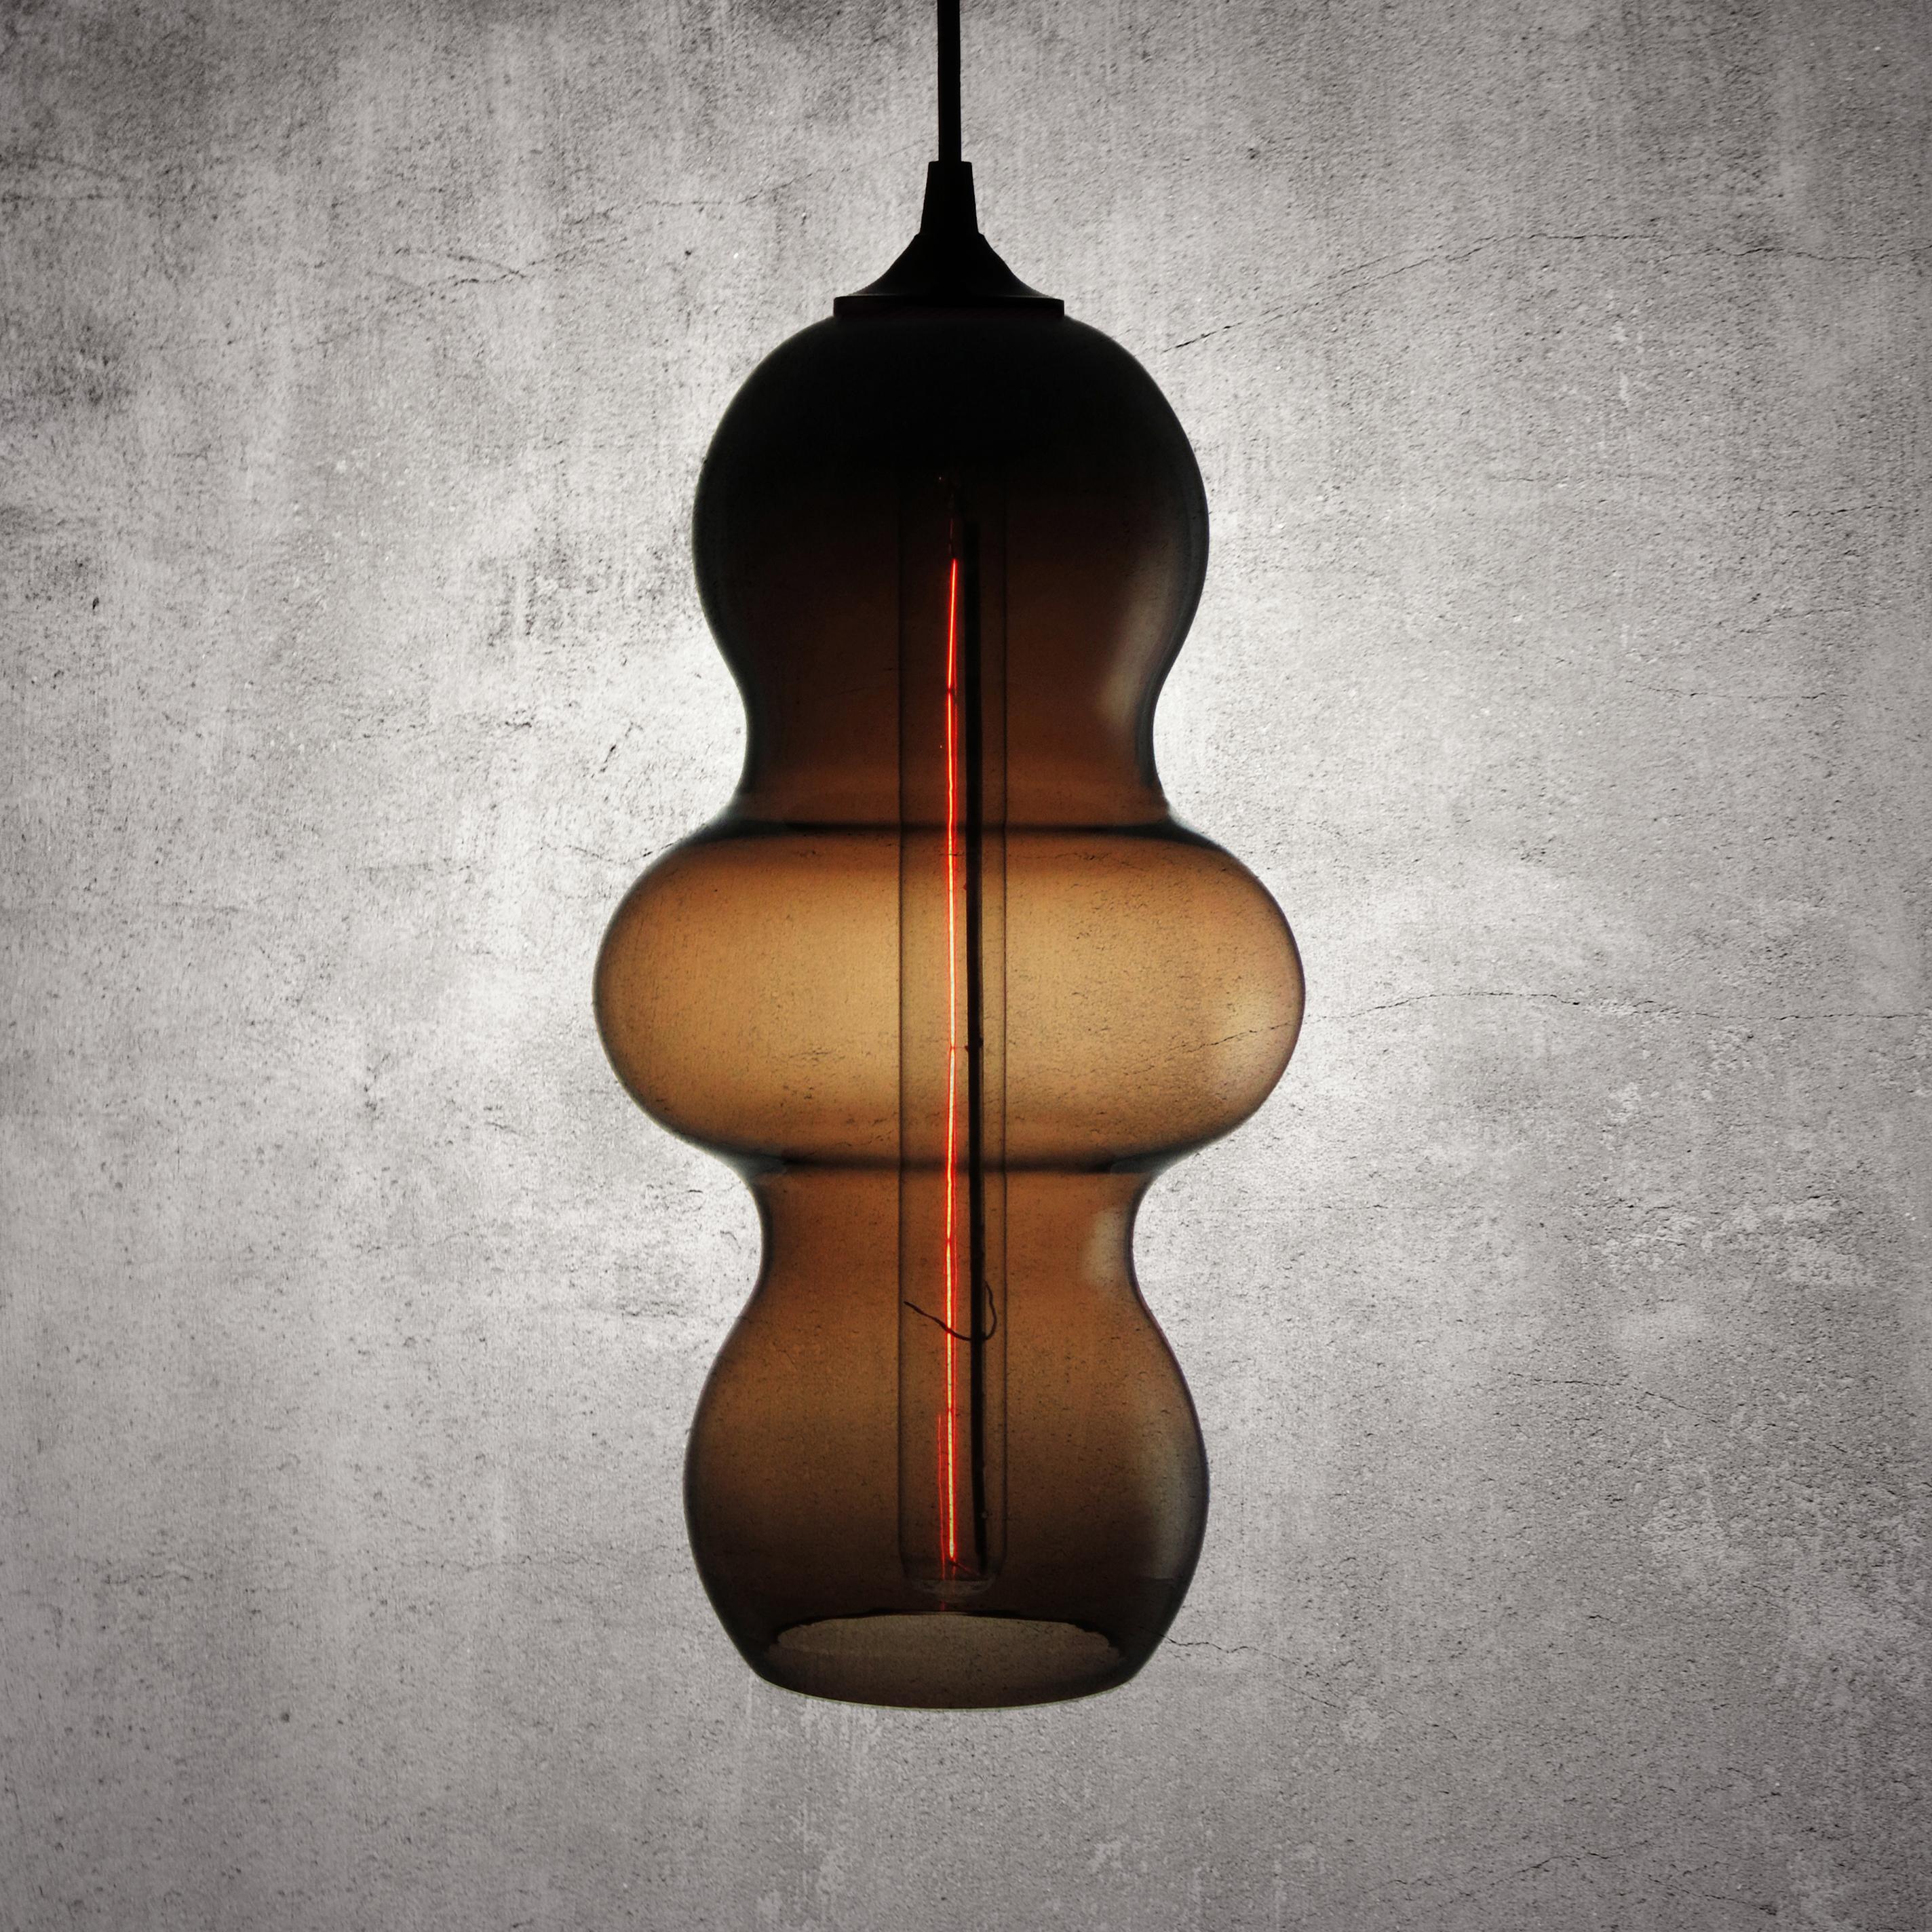 The Tamarindo contemporary glass pendant lamp is a contemporary interpretation of the tamarind fruit. Encapsulating its characteristics, the Tamarindo is sleek, curvaceous and light, hanging effortlessly with its long elongated form juxtaposed by a